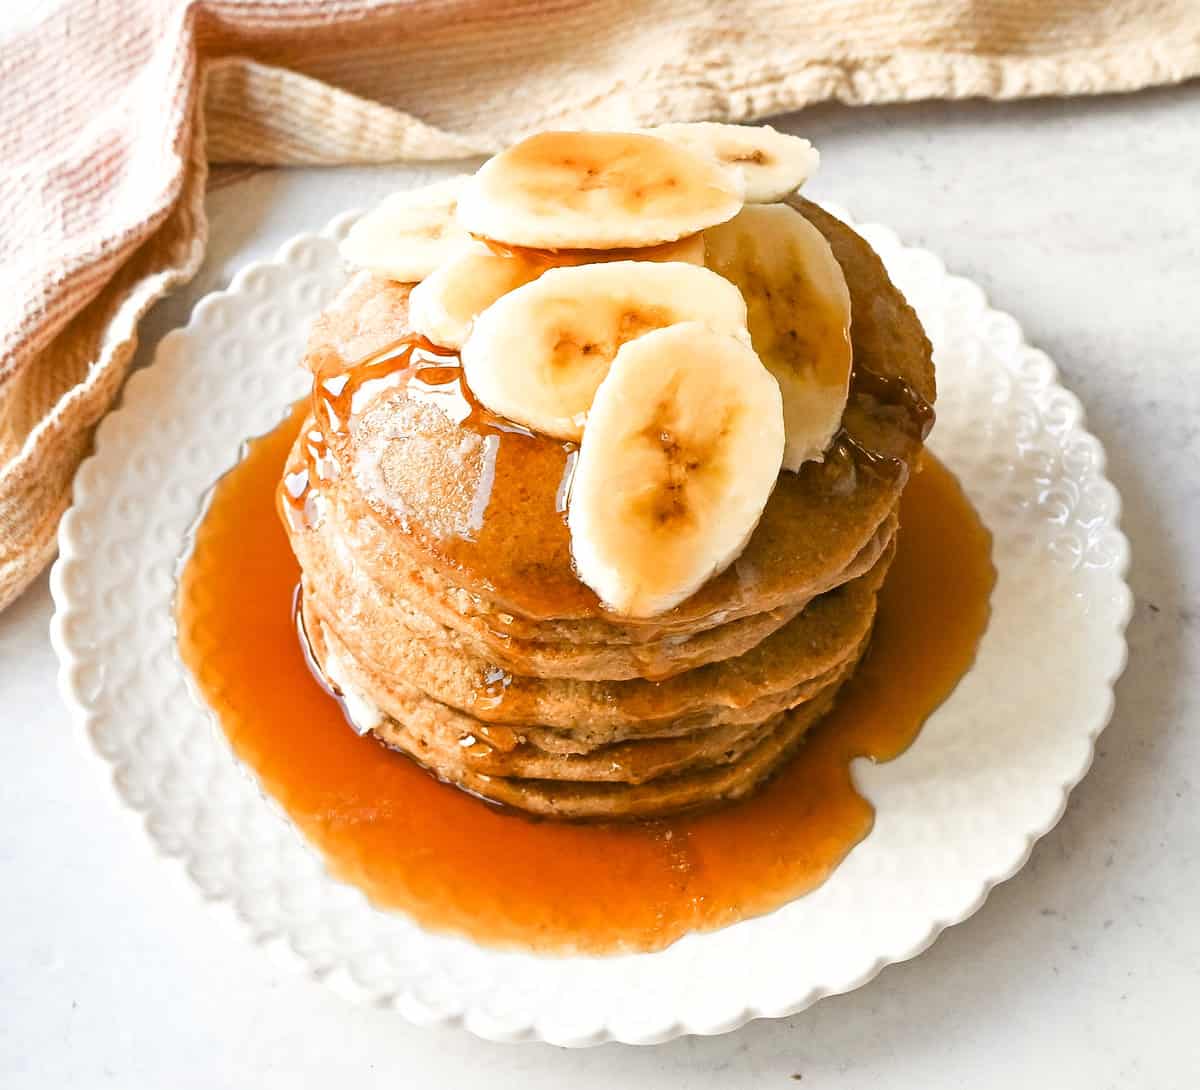 Healthy Banana Oatmeal Pancakes. Banana and Oatmeal Pancakes are delicious healthy pancakes that are gluten-free, dairy-free, and sugar-free. You won't miss any of it! These are the best healthy pancakes have zero butter or oil in them. These light and fluffy gluten-free pancakes will keep you full and satisfied without all of the fillers.  These Banana Oat Pancakes are whipped up in a blender in no time at all. You won't believe how good they taste!